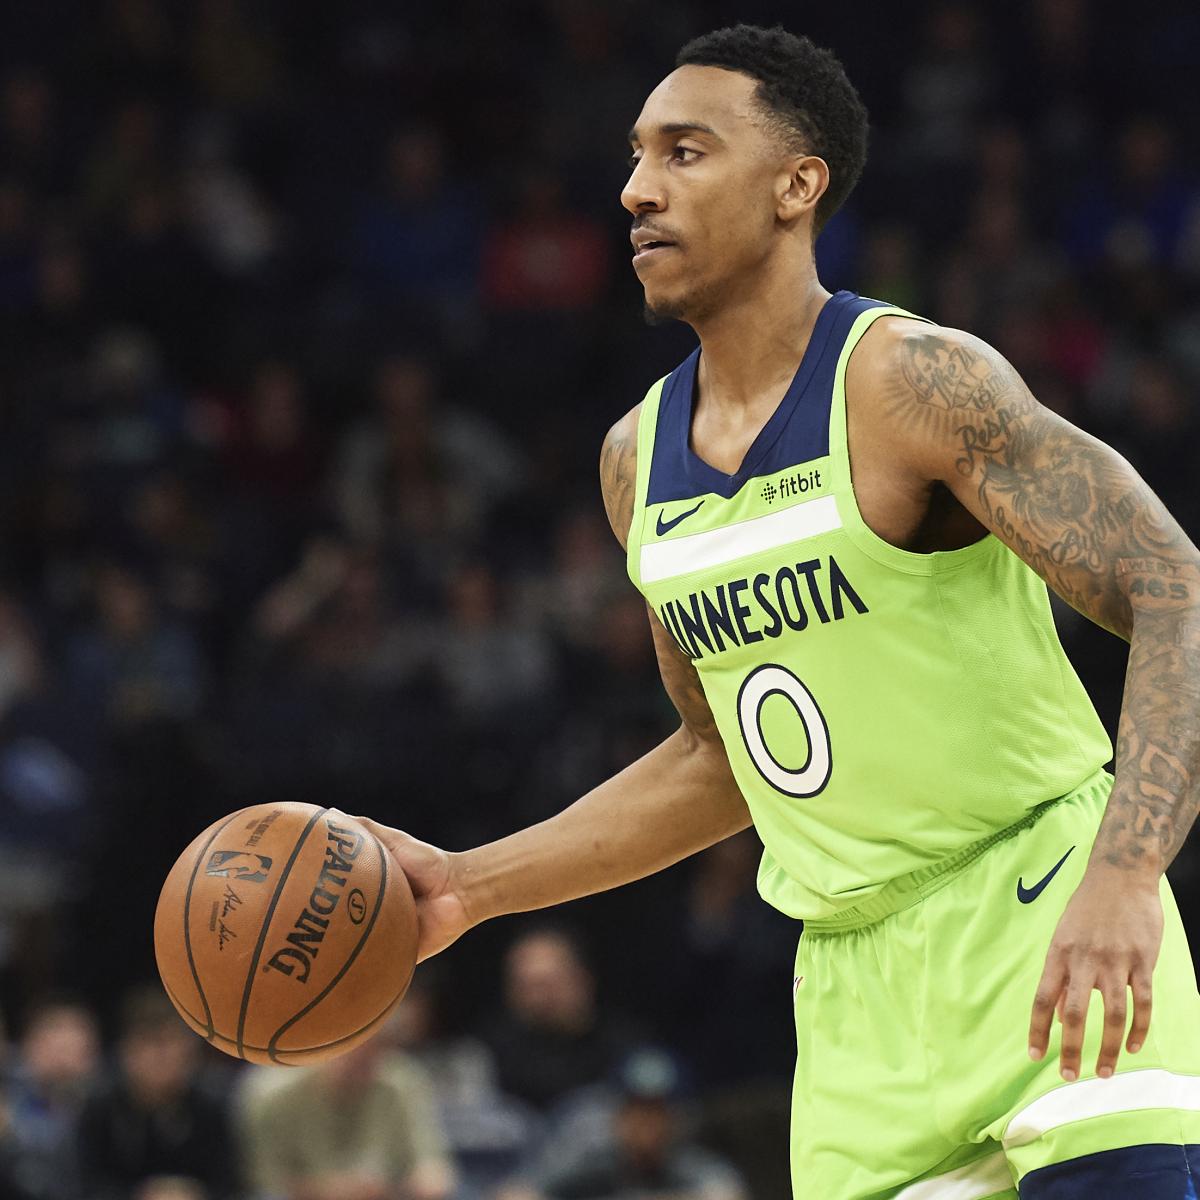 Easy!- Jeff Teague, who made $98,000,000 from NBA contracts